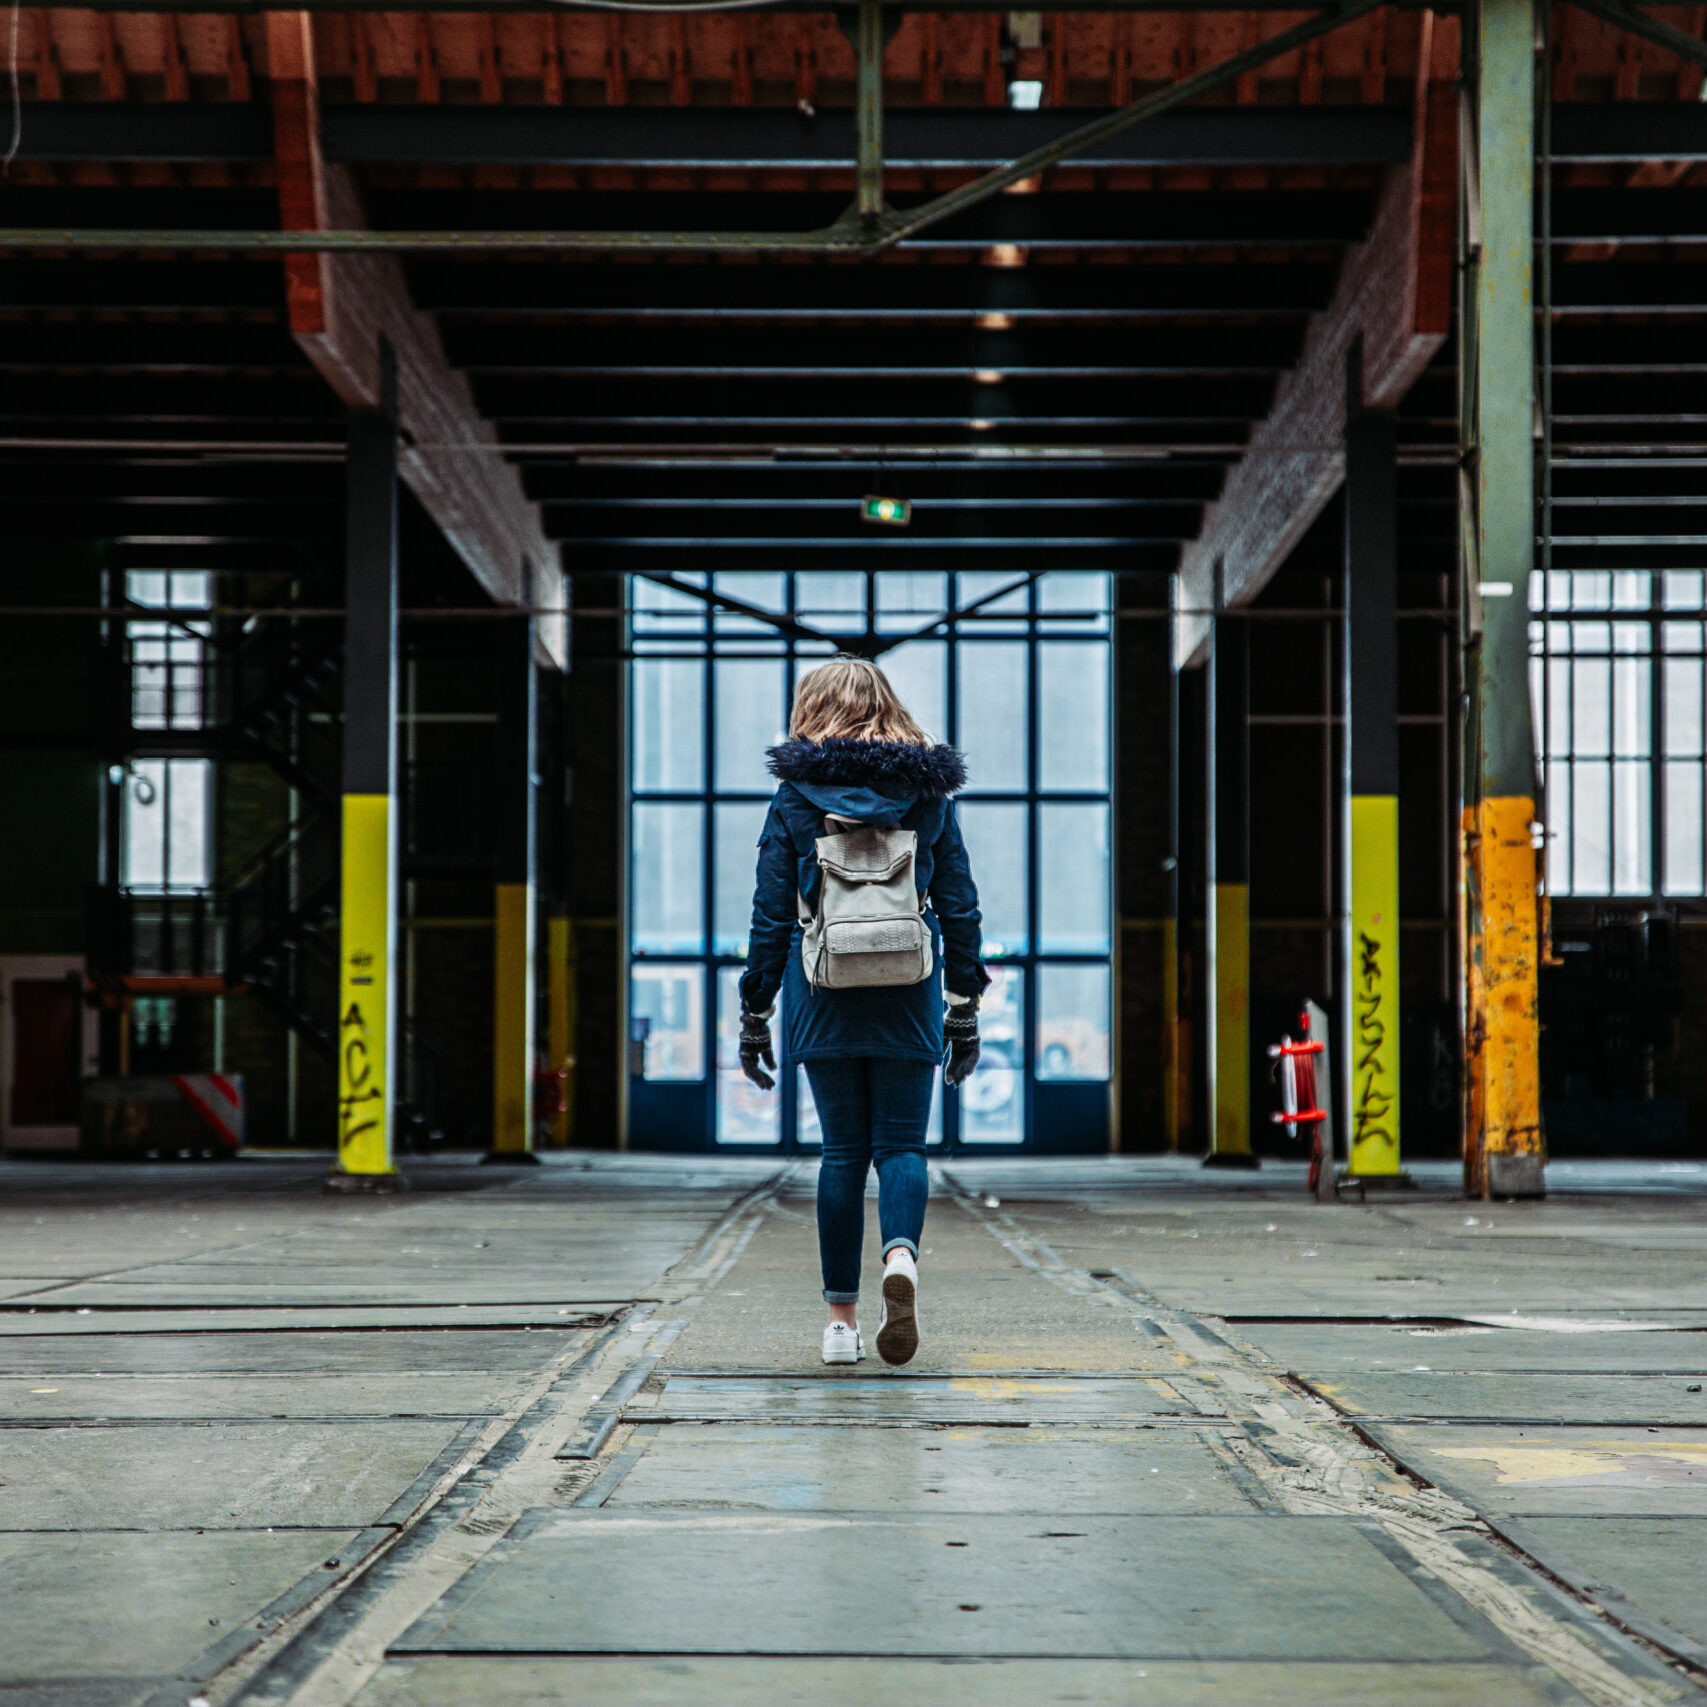 Girl explores Warehouse in Amsterdam